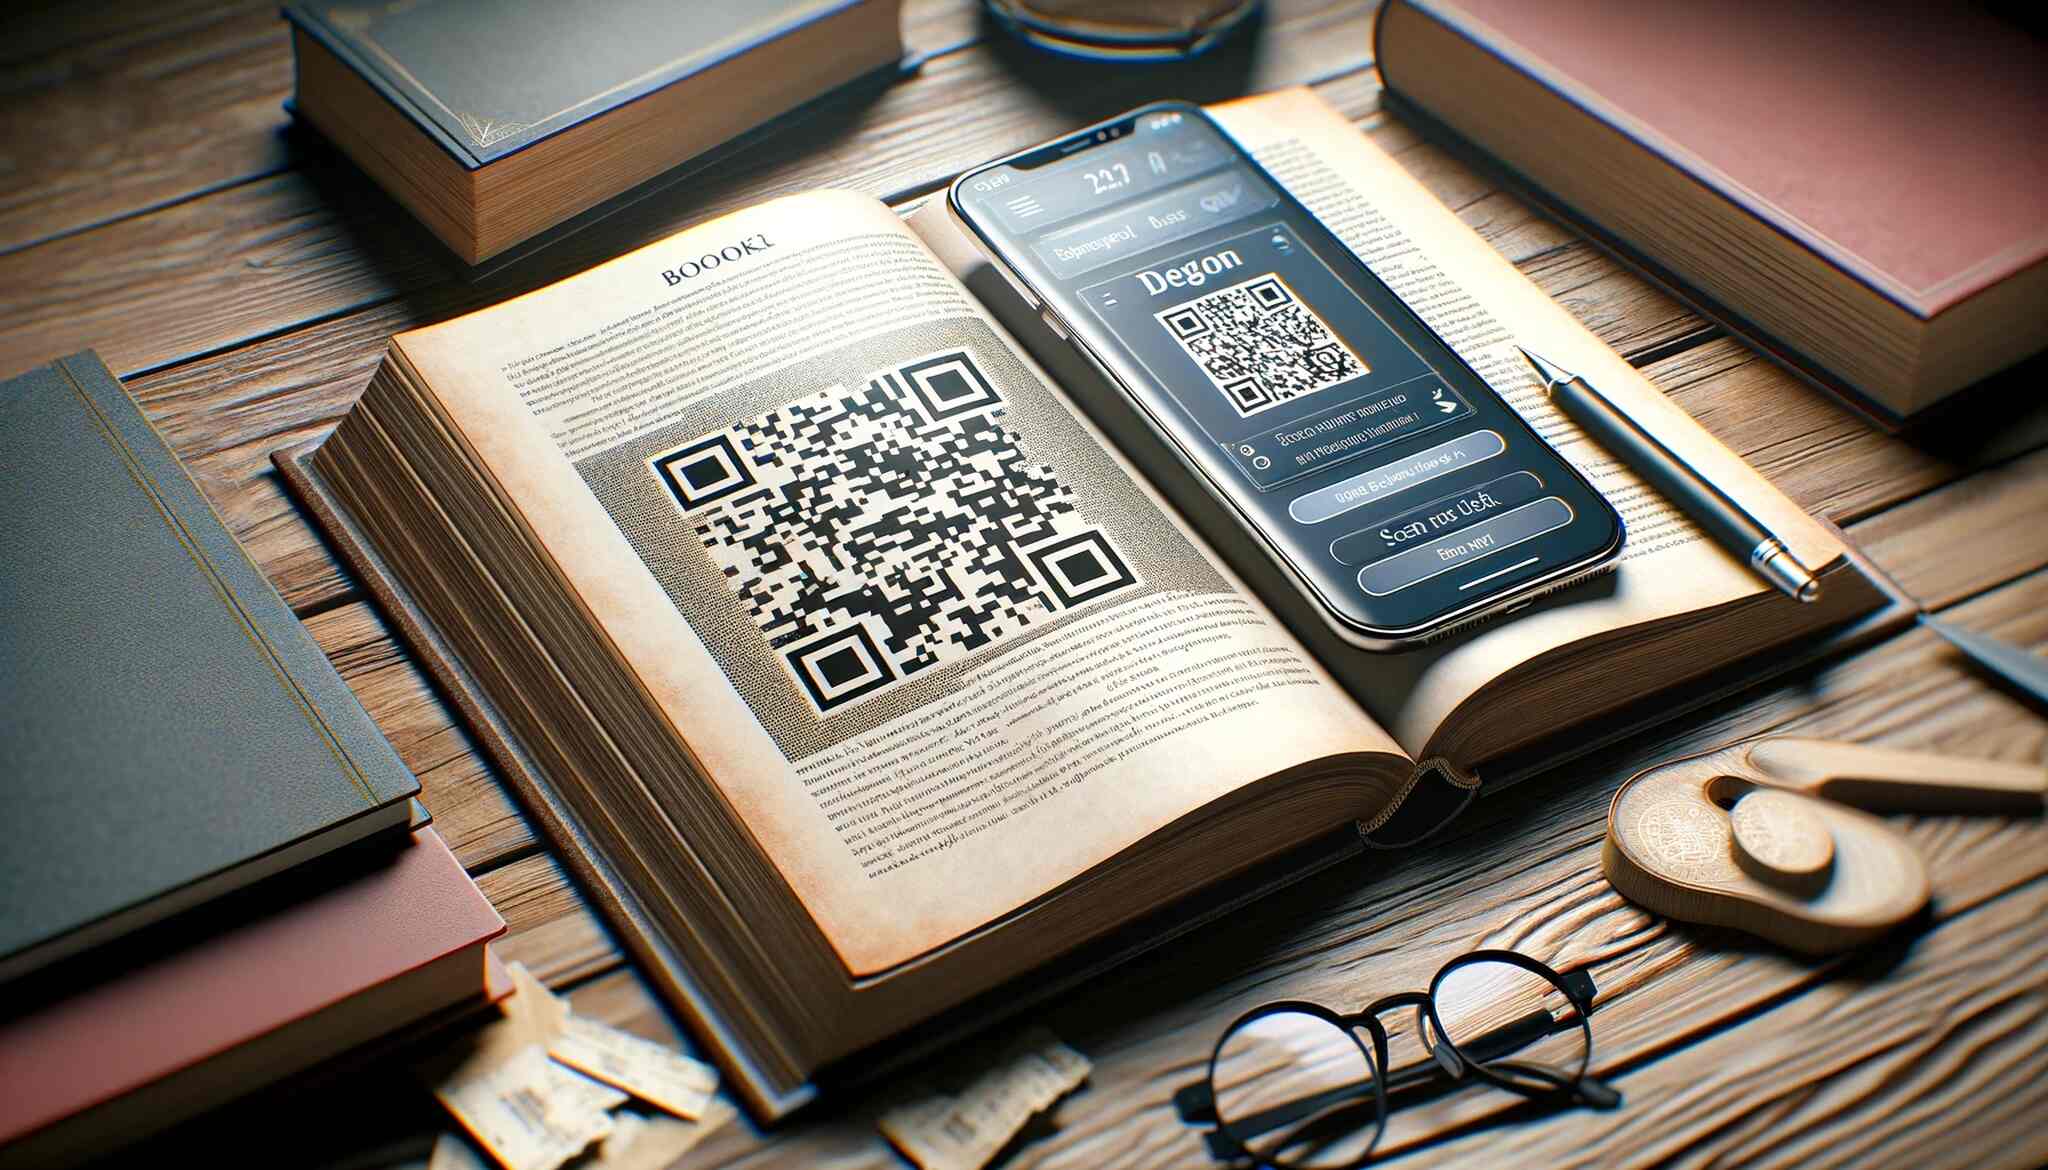 An open book that includes a QR code lying on a wooden table